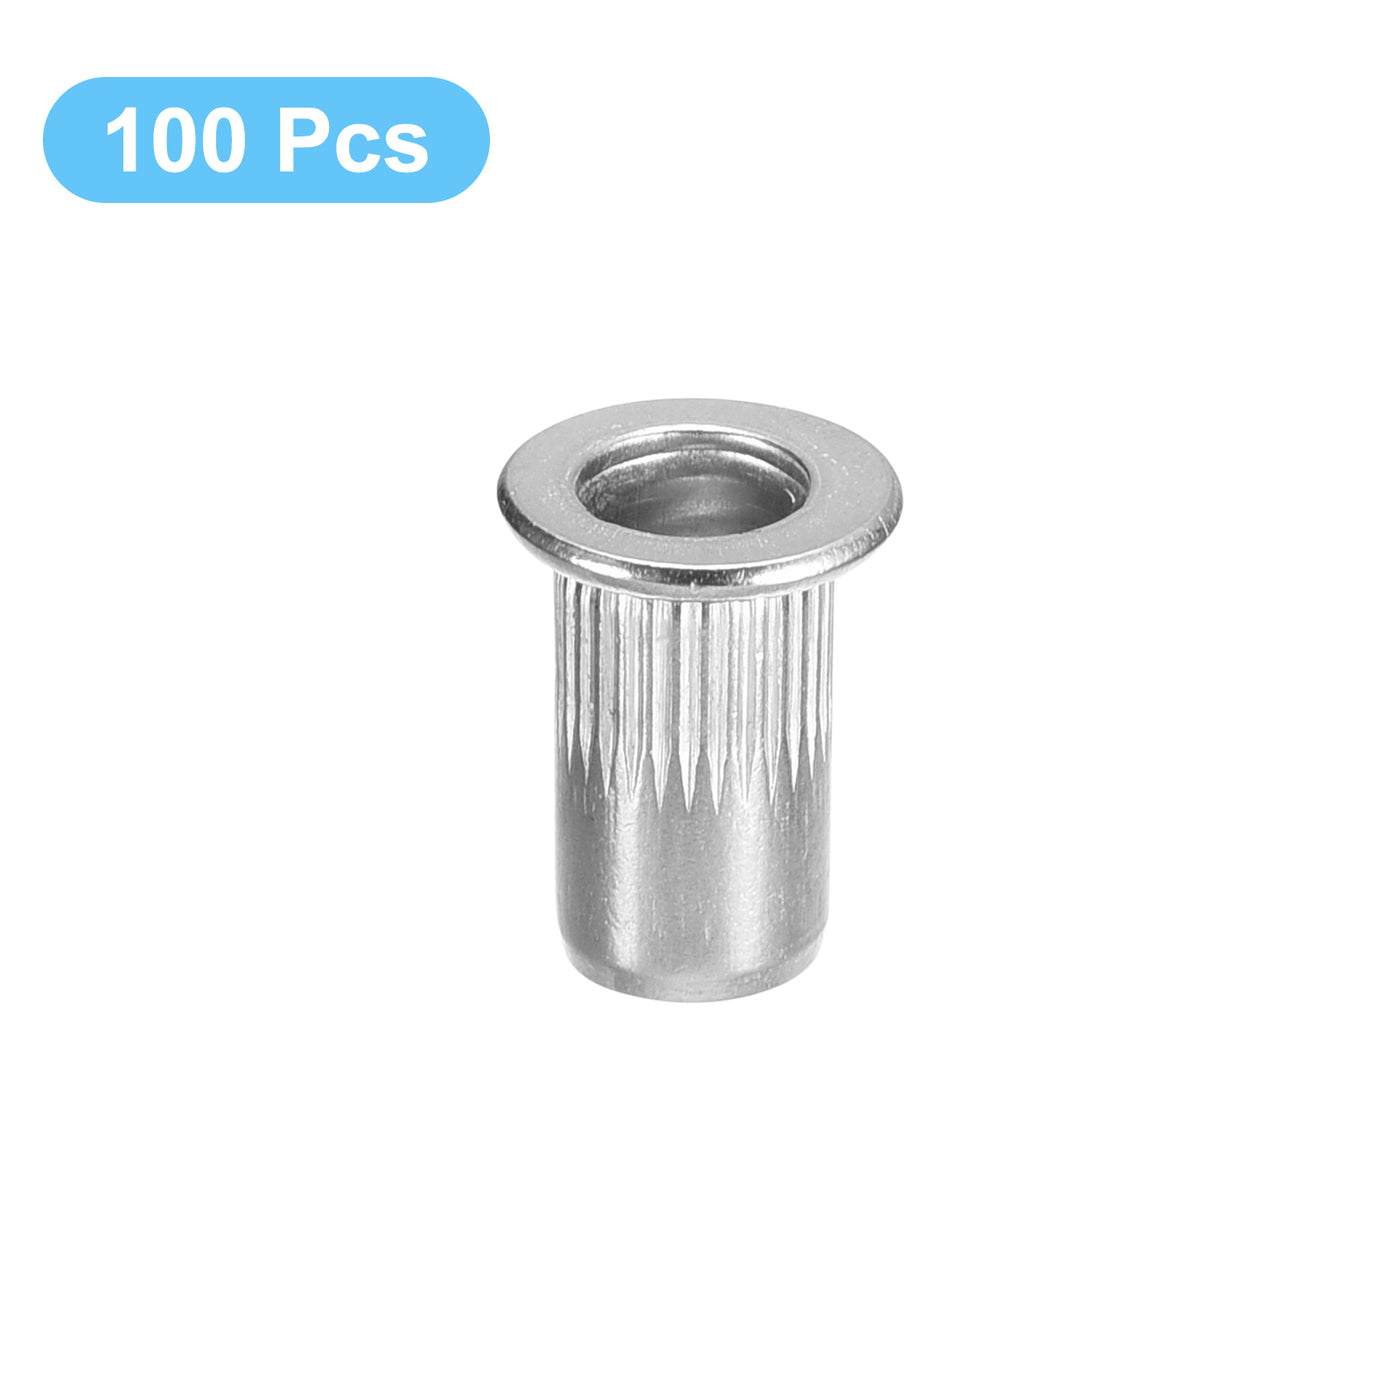 uxcell Uxcell Rivet Nuts, 304 Stainless Steel Knurled Flat Head Threaded Insert Nuts for Metal, Plastic